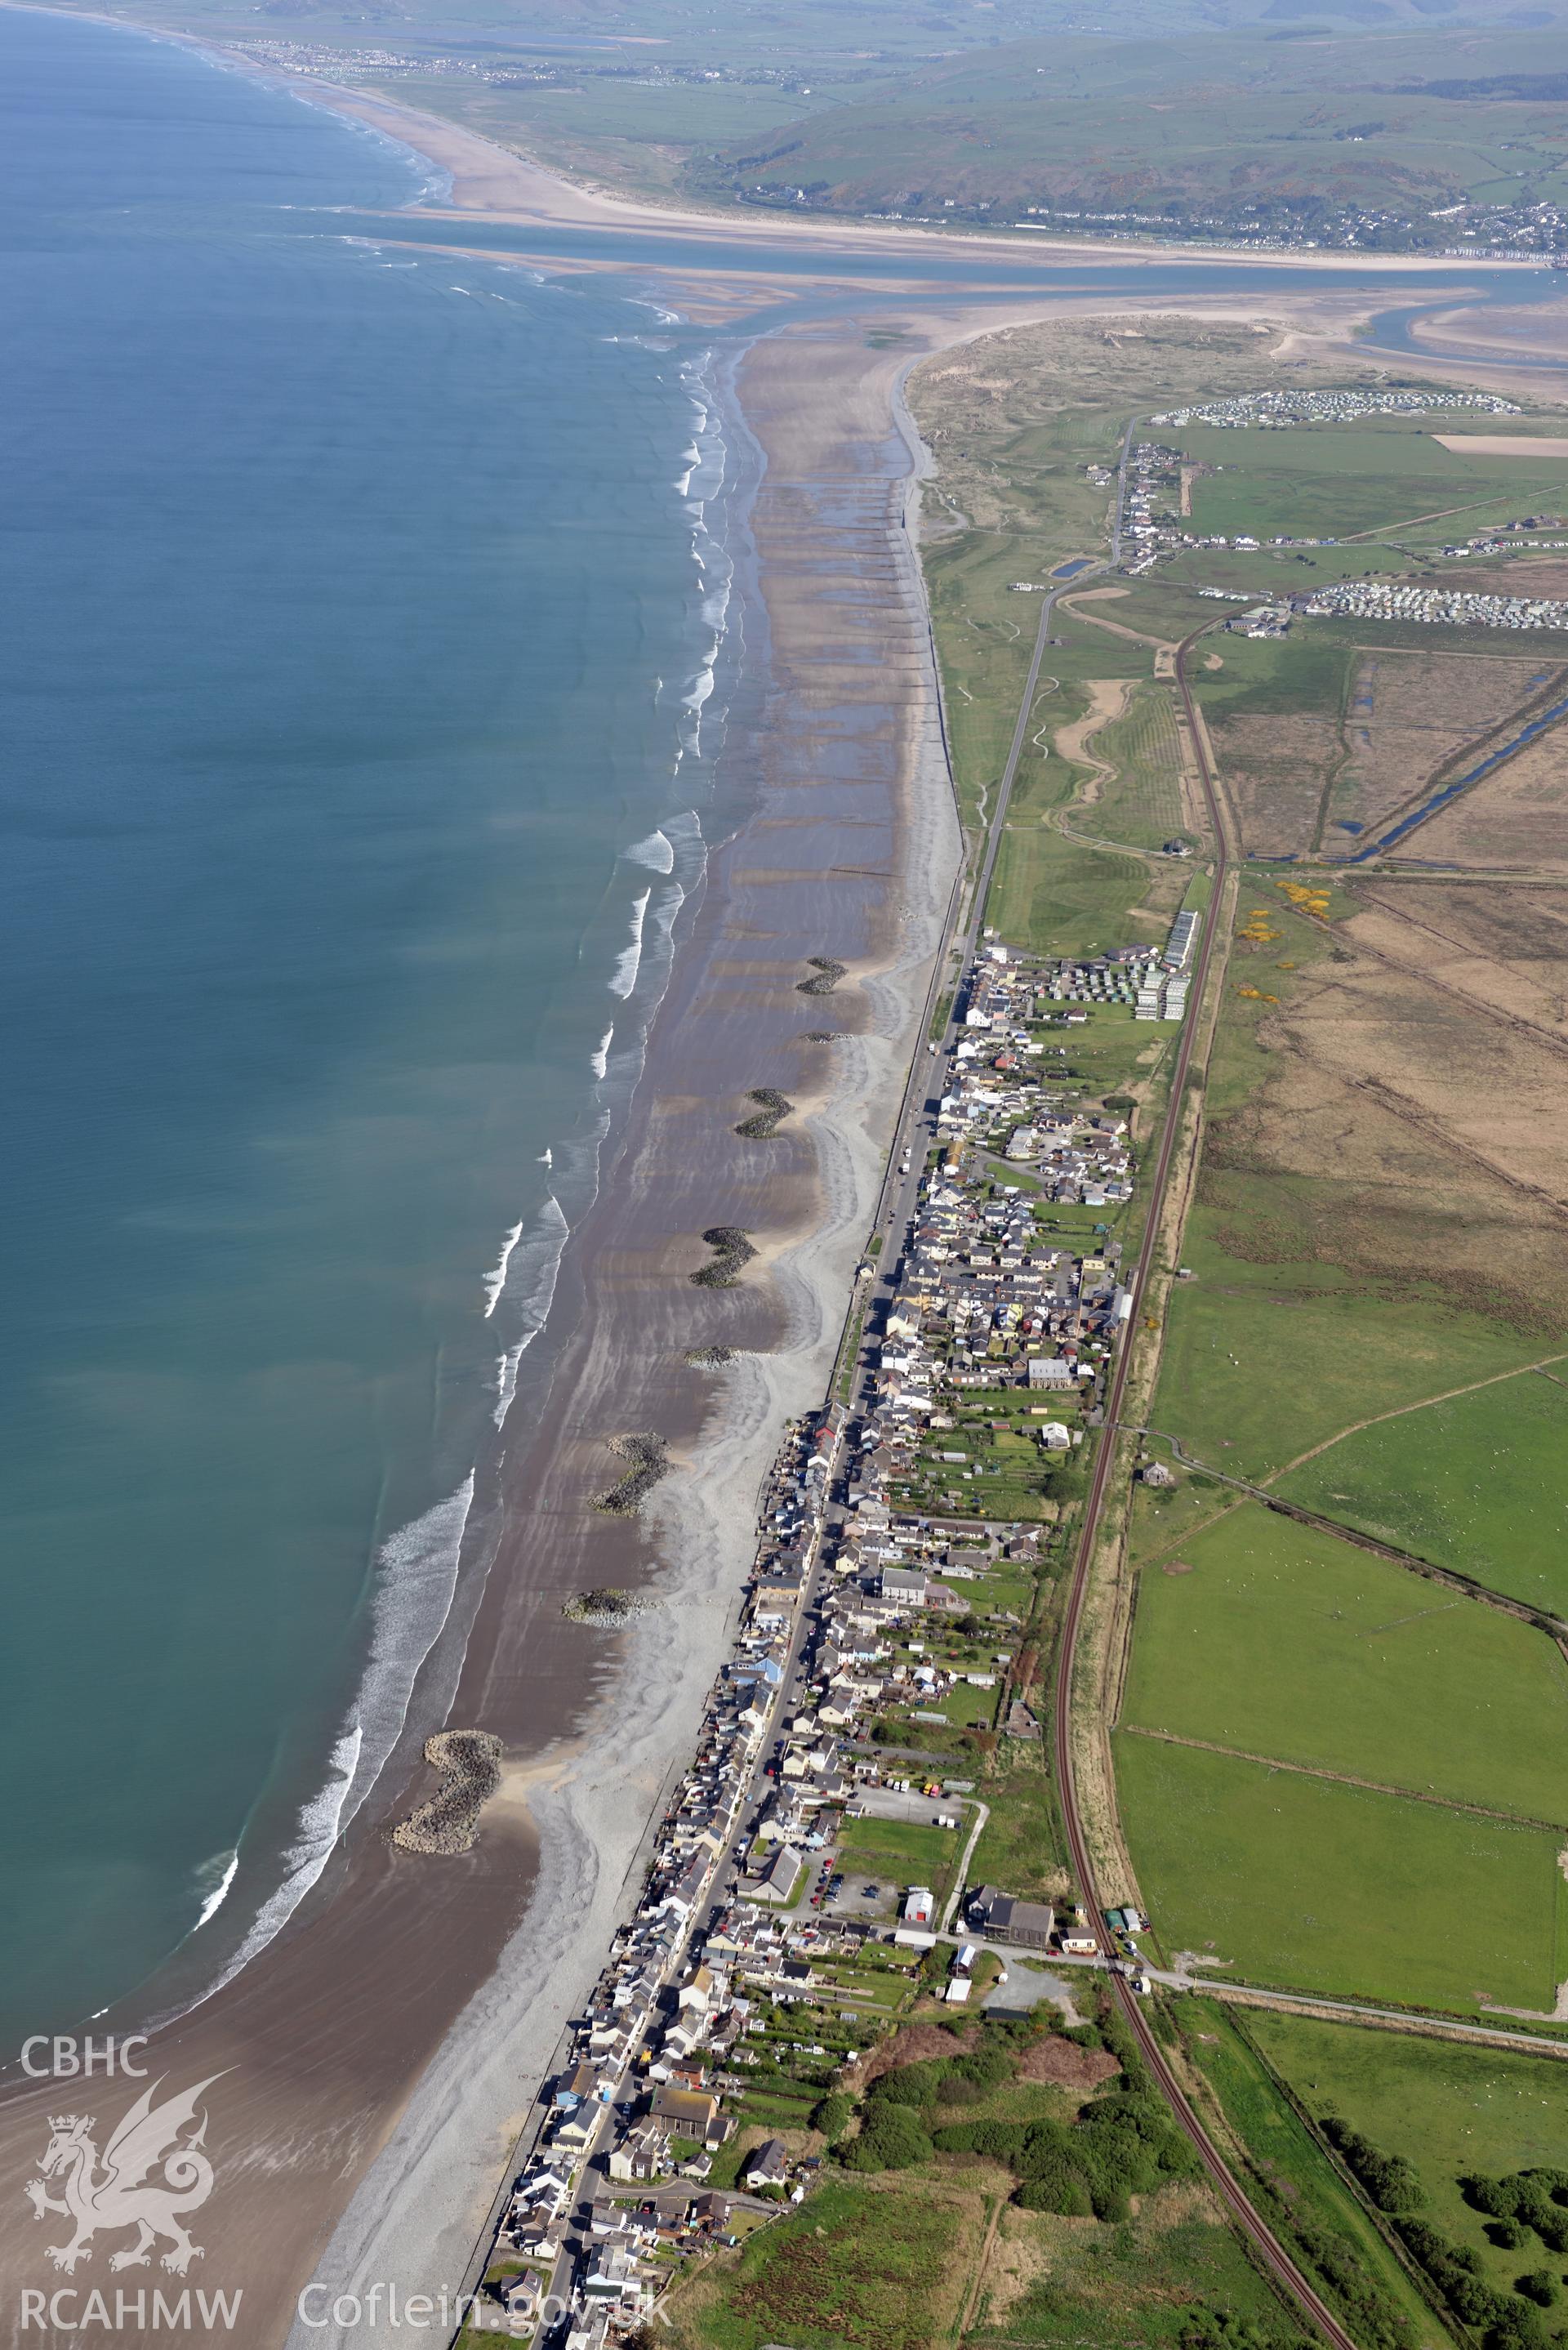 Aerial photography of Borth taken on 3rd May 2017.  Baseline aerial reconnaissance survey for the CHERISH Project. ? Crown: CHERISH PROJECT 2017. Produced with EU funds through the Ireland Wales Co-operation Programme 2014-2020. All material made freely